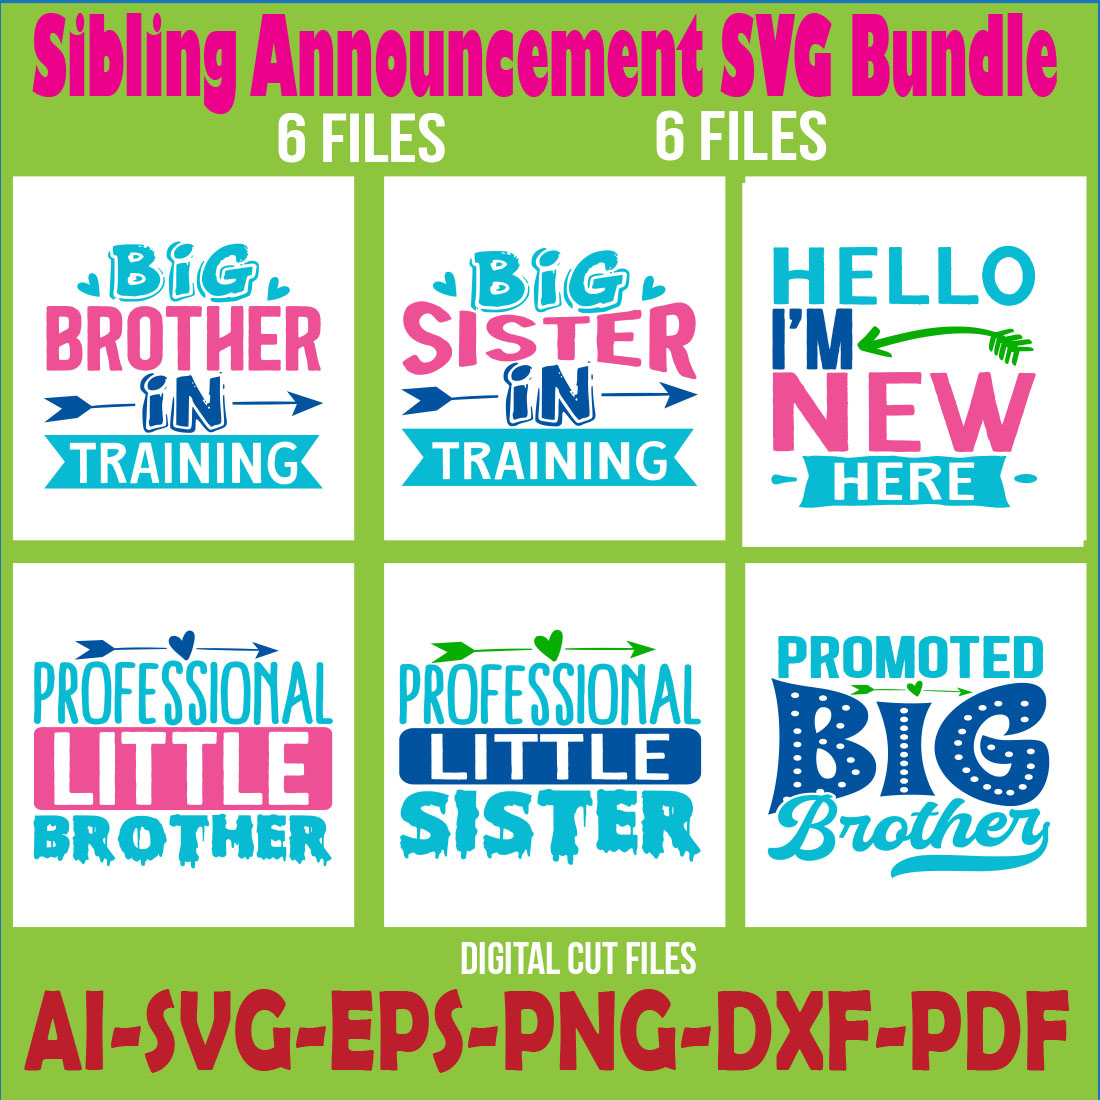 Sibling Announcement SVG Bundle cover image.